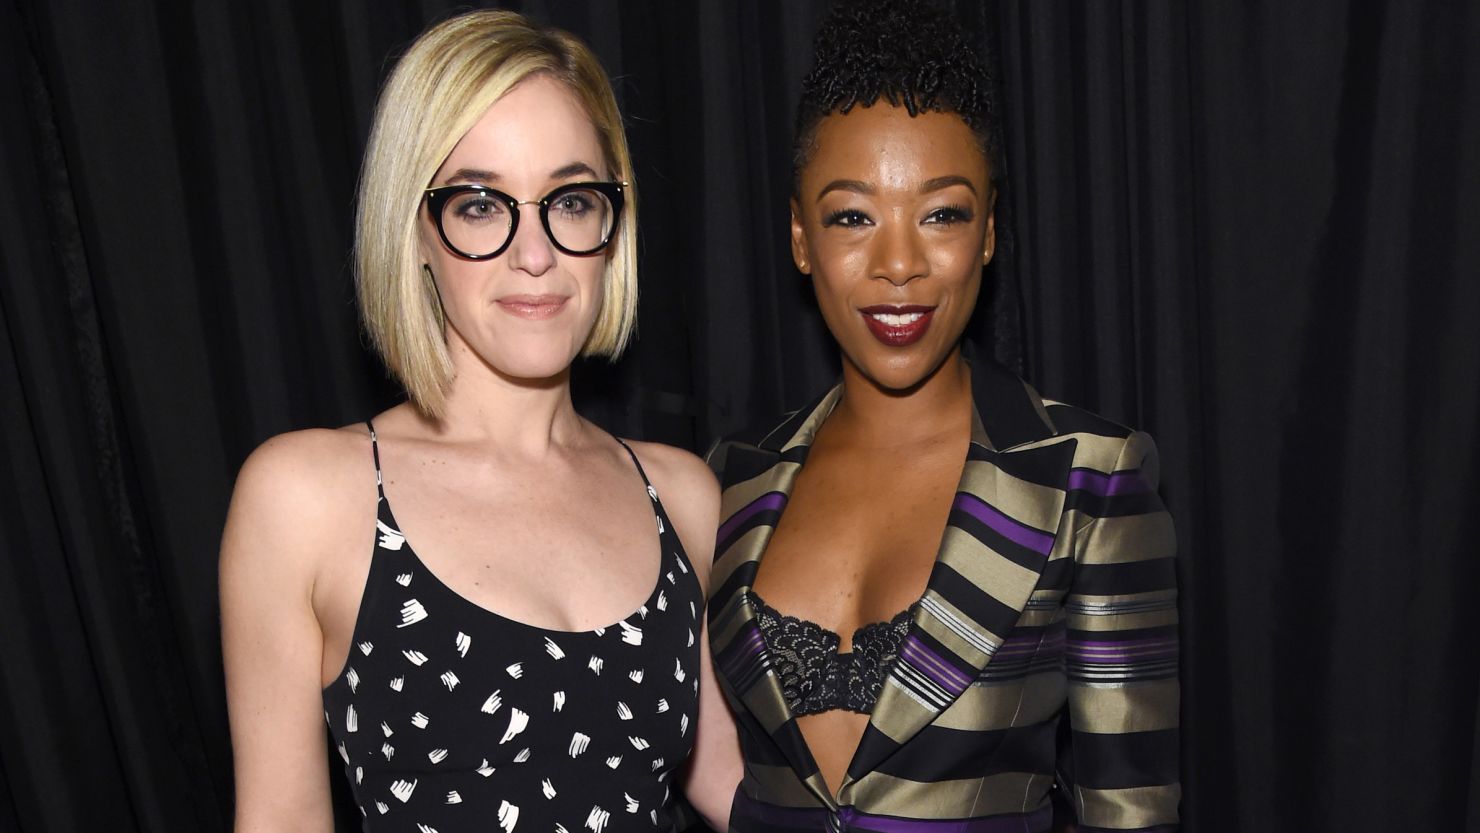 "Orange is the New Black" writer Lauren Morelli and actress Samira Wiley wed in March, more than four years after meeting on the set of the hit Netflix show. 